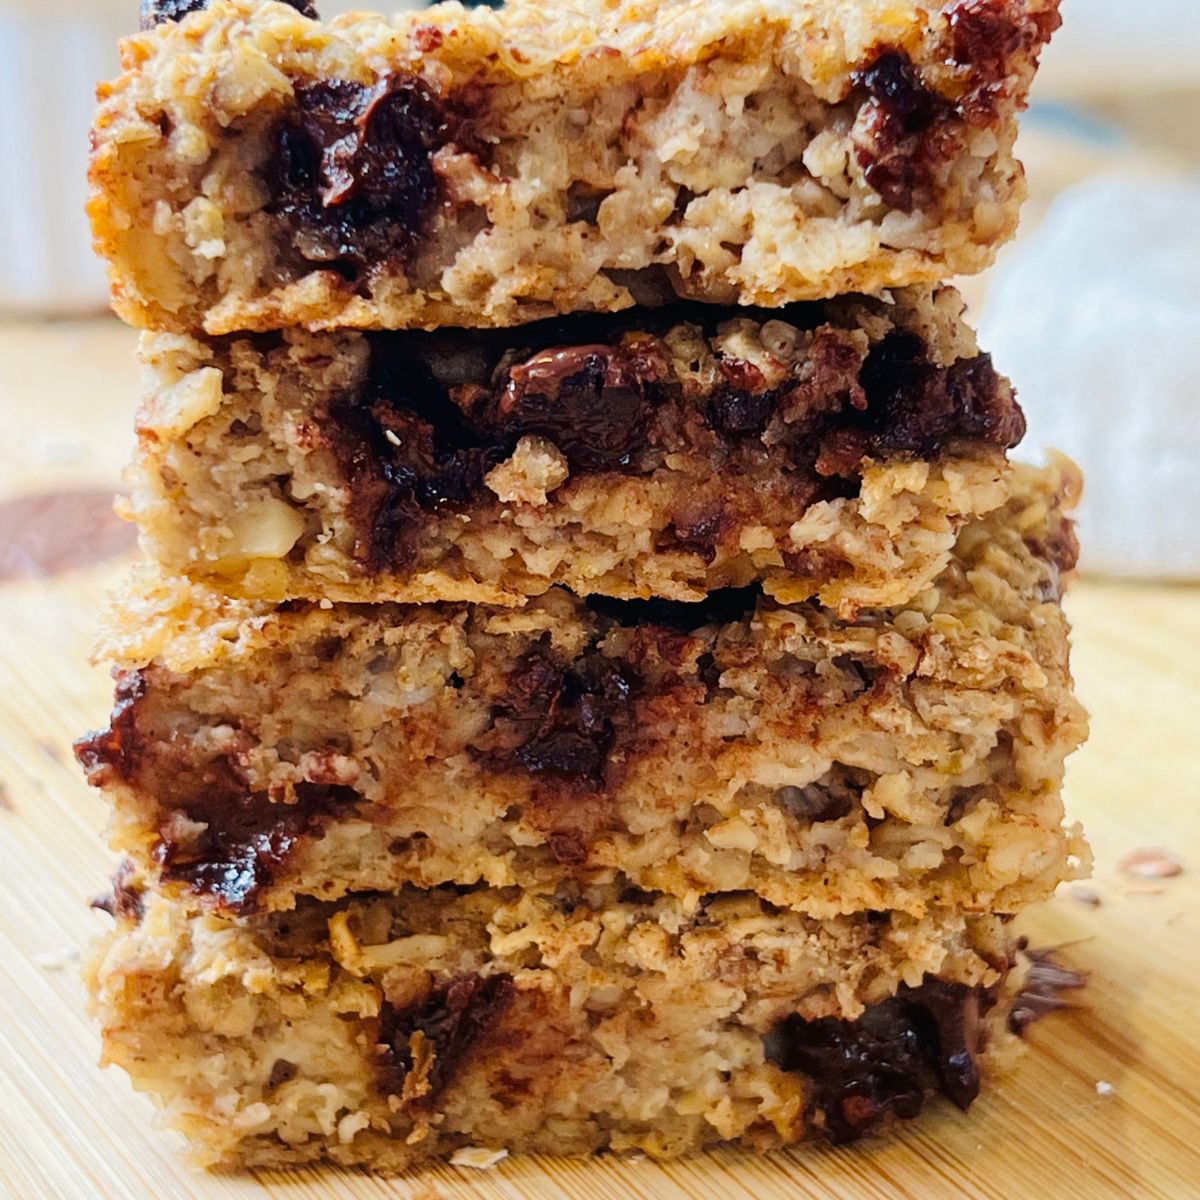 Baked Oatmeal Bars stacked on top of each other on a wooden cutting board